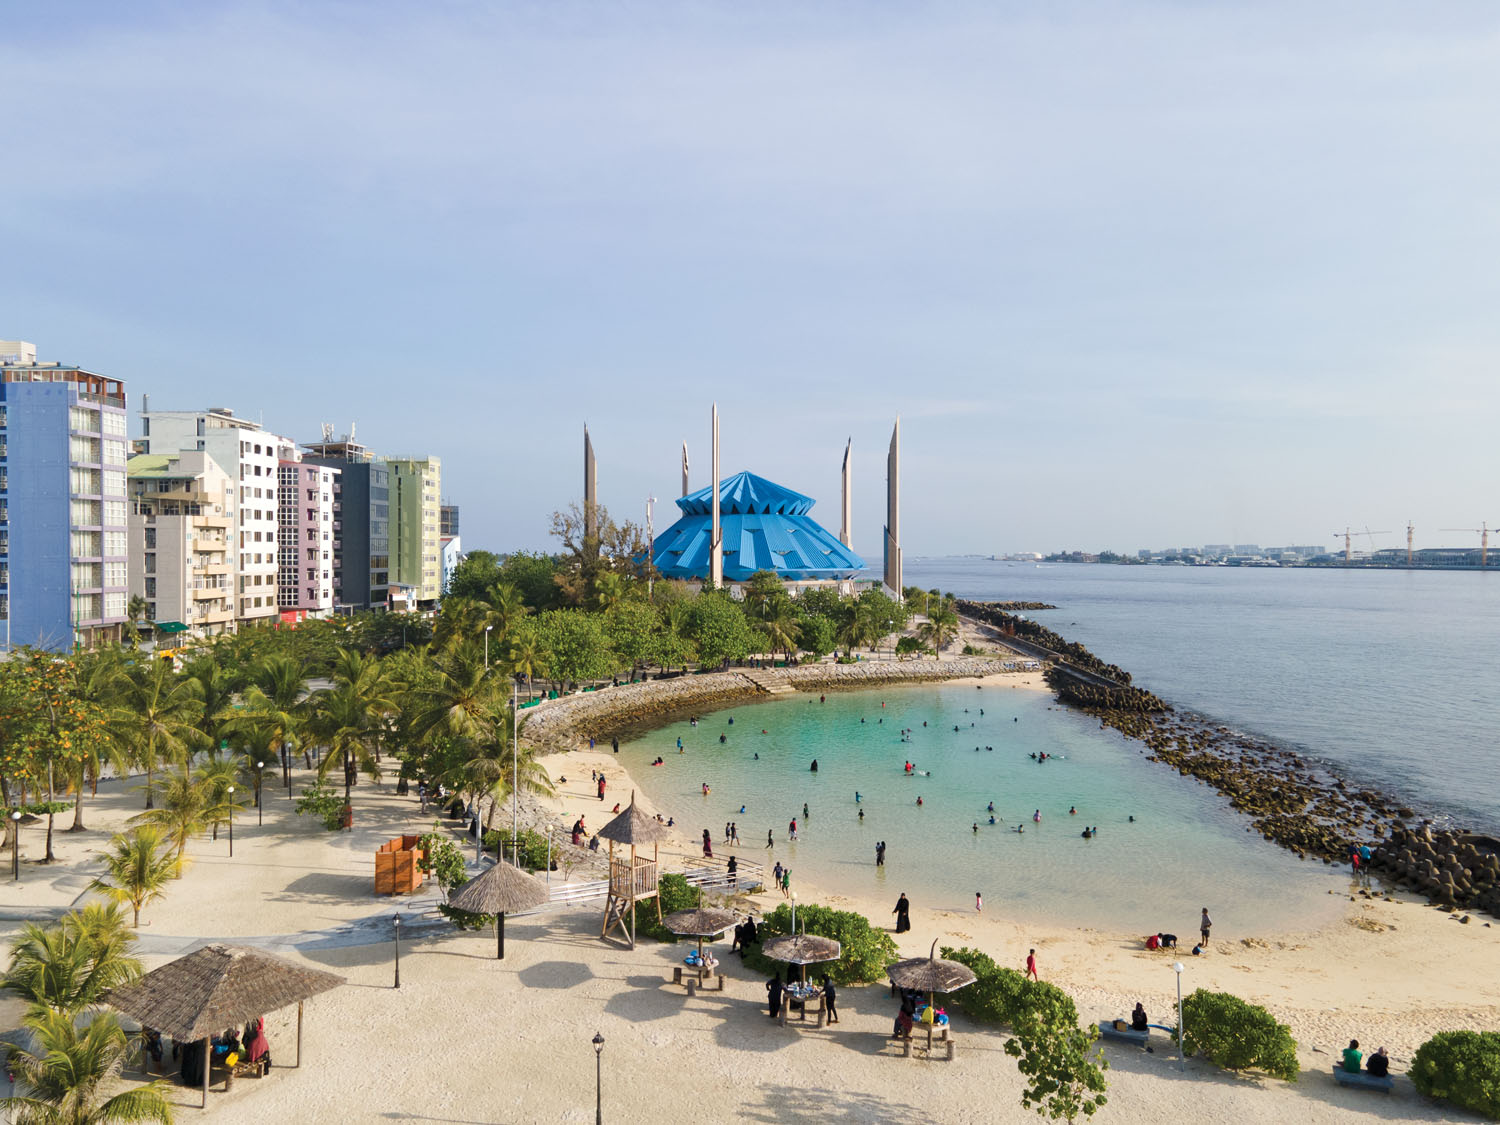 Tetrapods and dikes have been positioned offshore to protect the artificial beach near the King Salman Mosque in Malé.